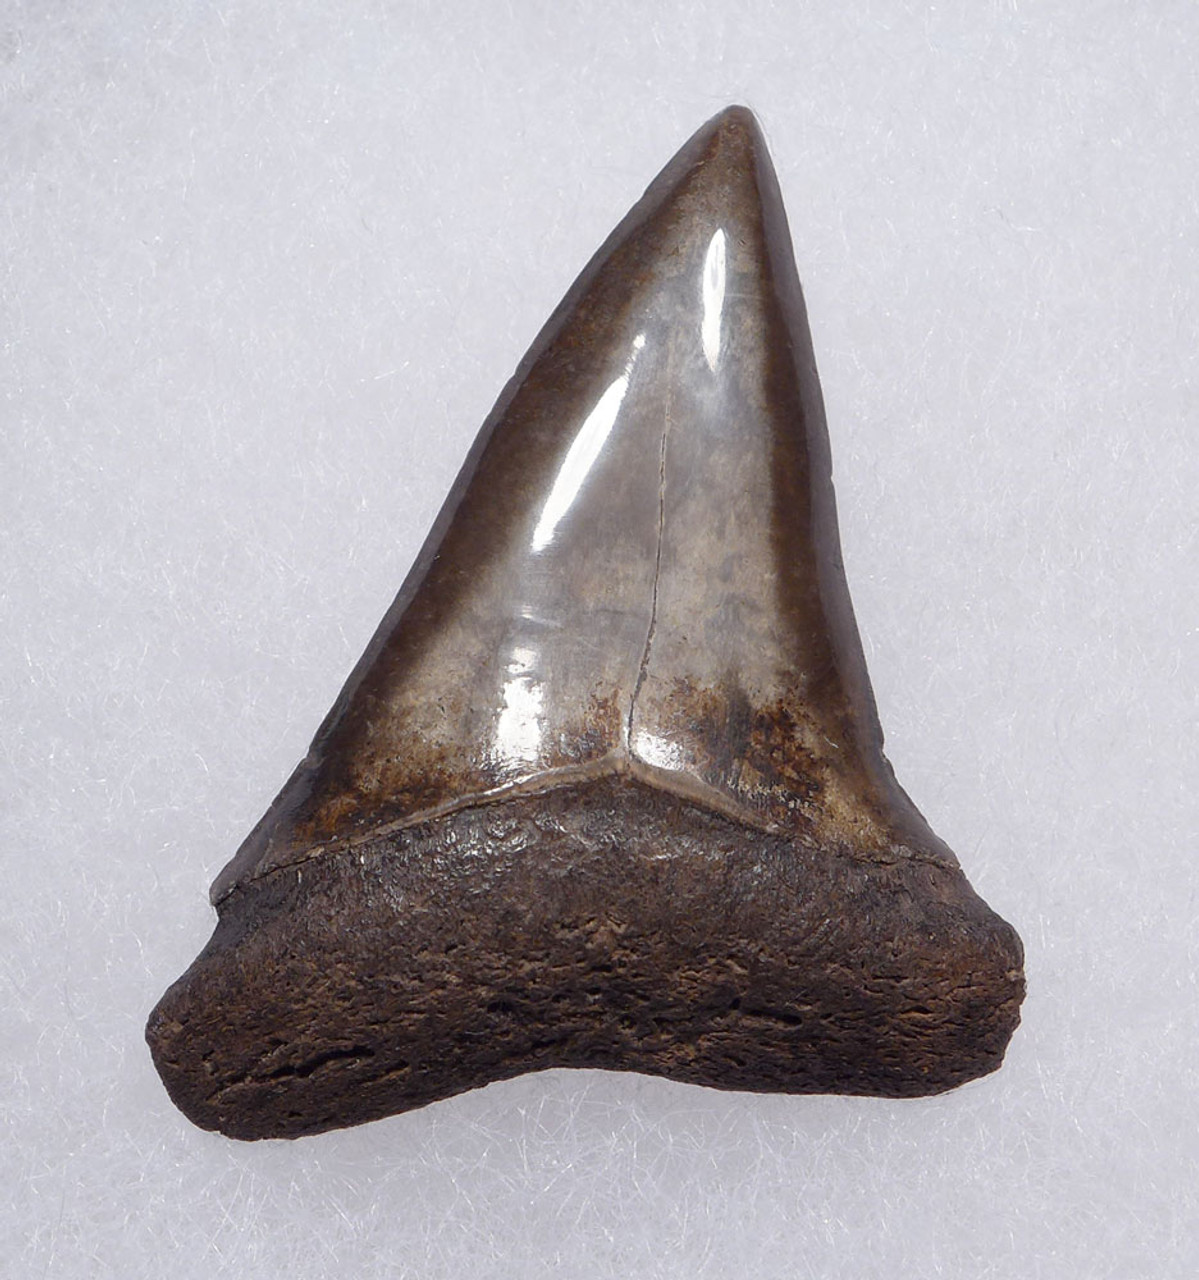 SUPERB 1.7 INCH USA FOSSIL SHARK TOOTH OF ISURUS HASTALIS BROAD TOOTH MAKO WITH CHATOYANT PLATINUM ENAMEL  *SHX158